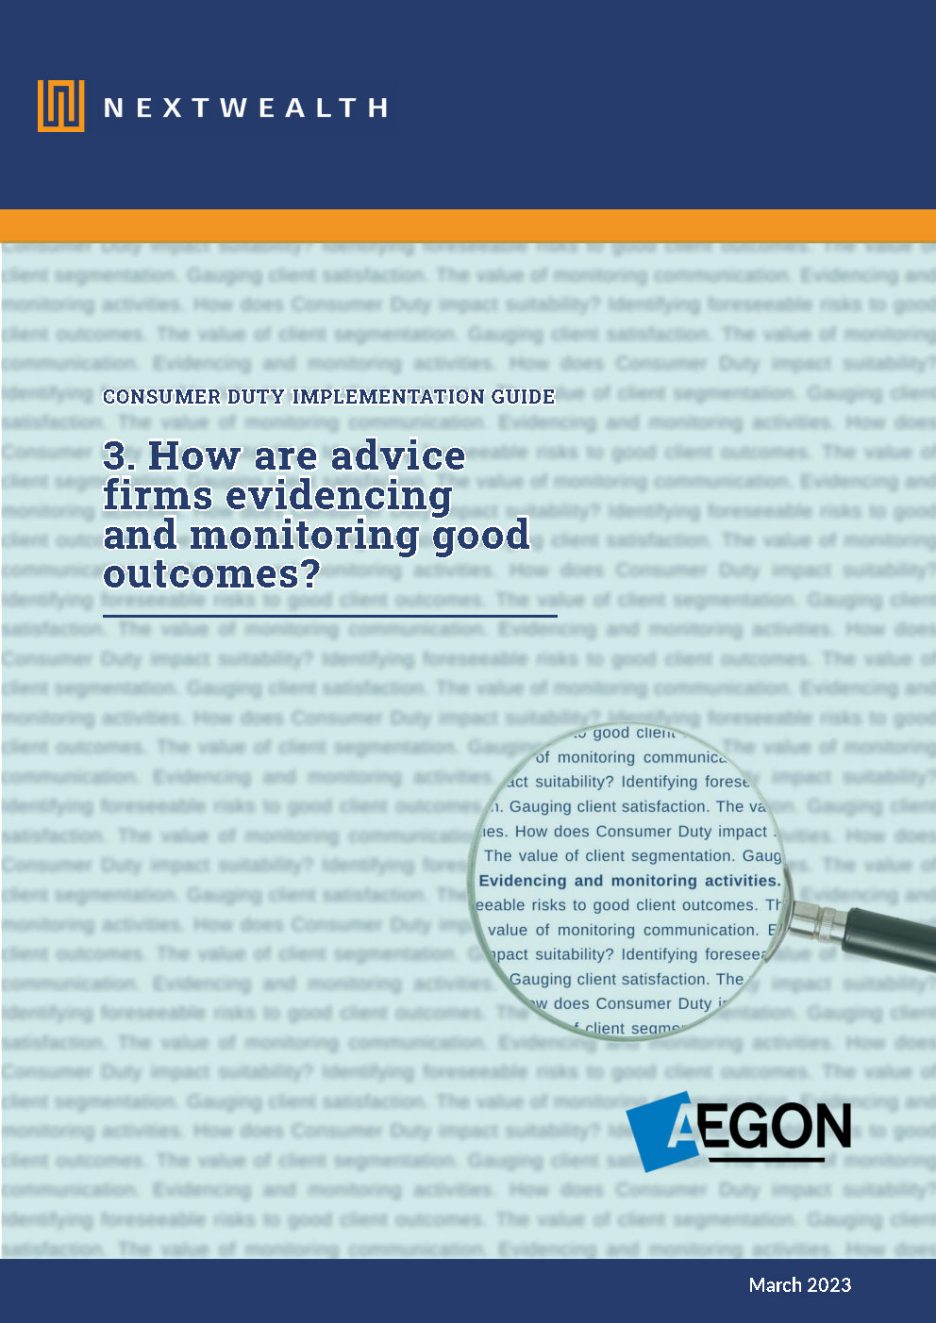 Thumbnail of the Consumer Duty Evidence and Monitoring guide.